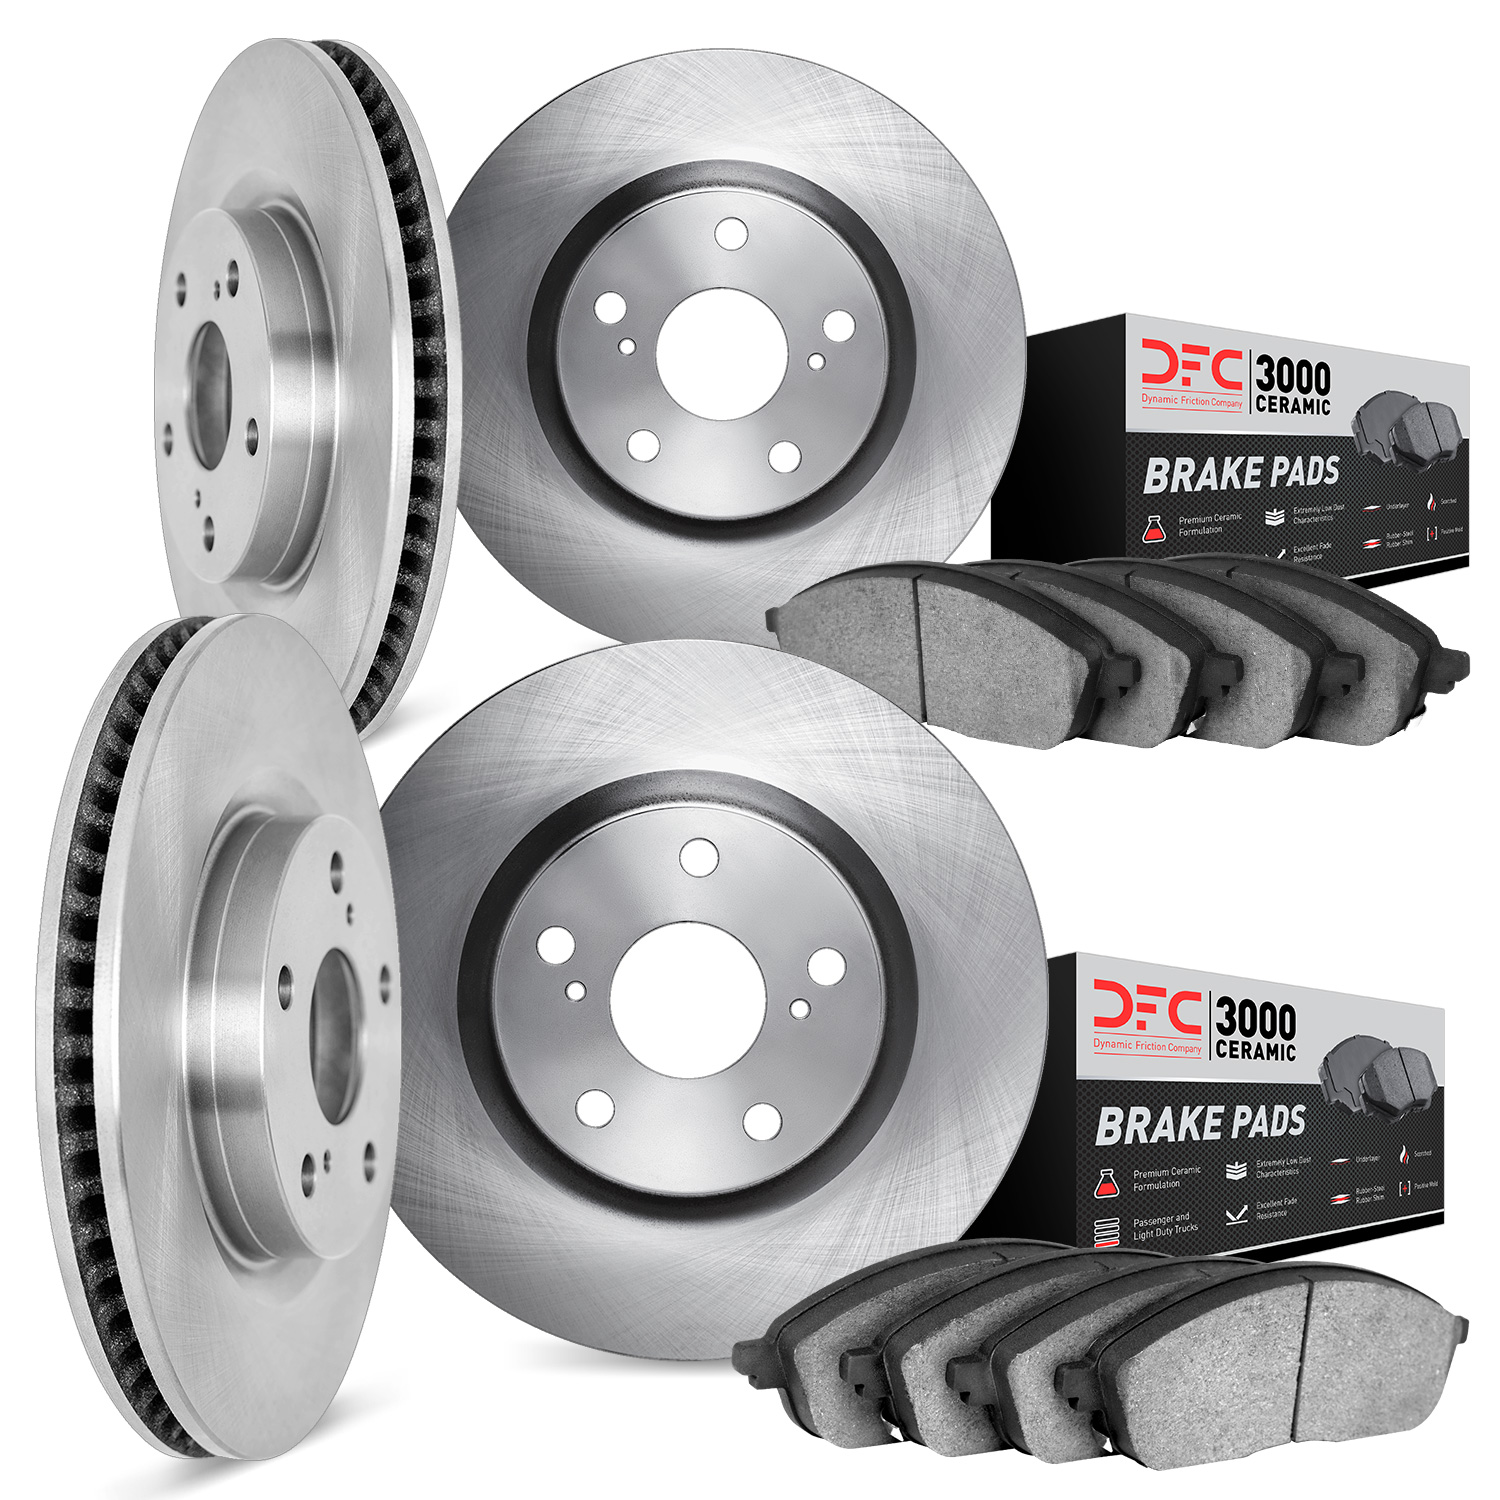 6304-76035 Brake Rotors with 3000-Series Ceramic Brake Pads Kit, 1993-1998 Lexus/Toyota/Scion, Position: Front and Rear